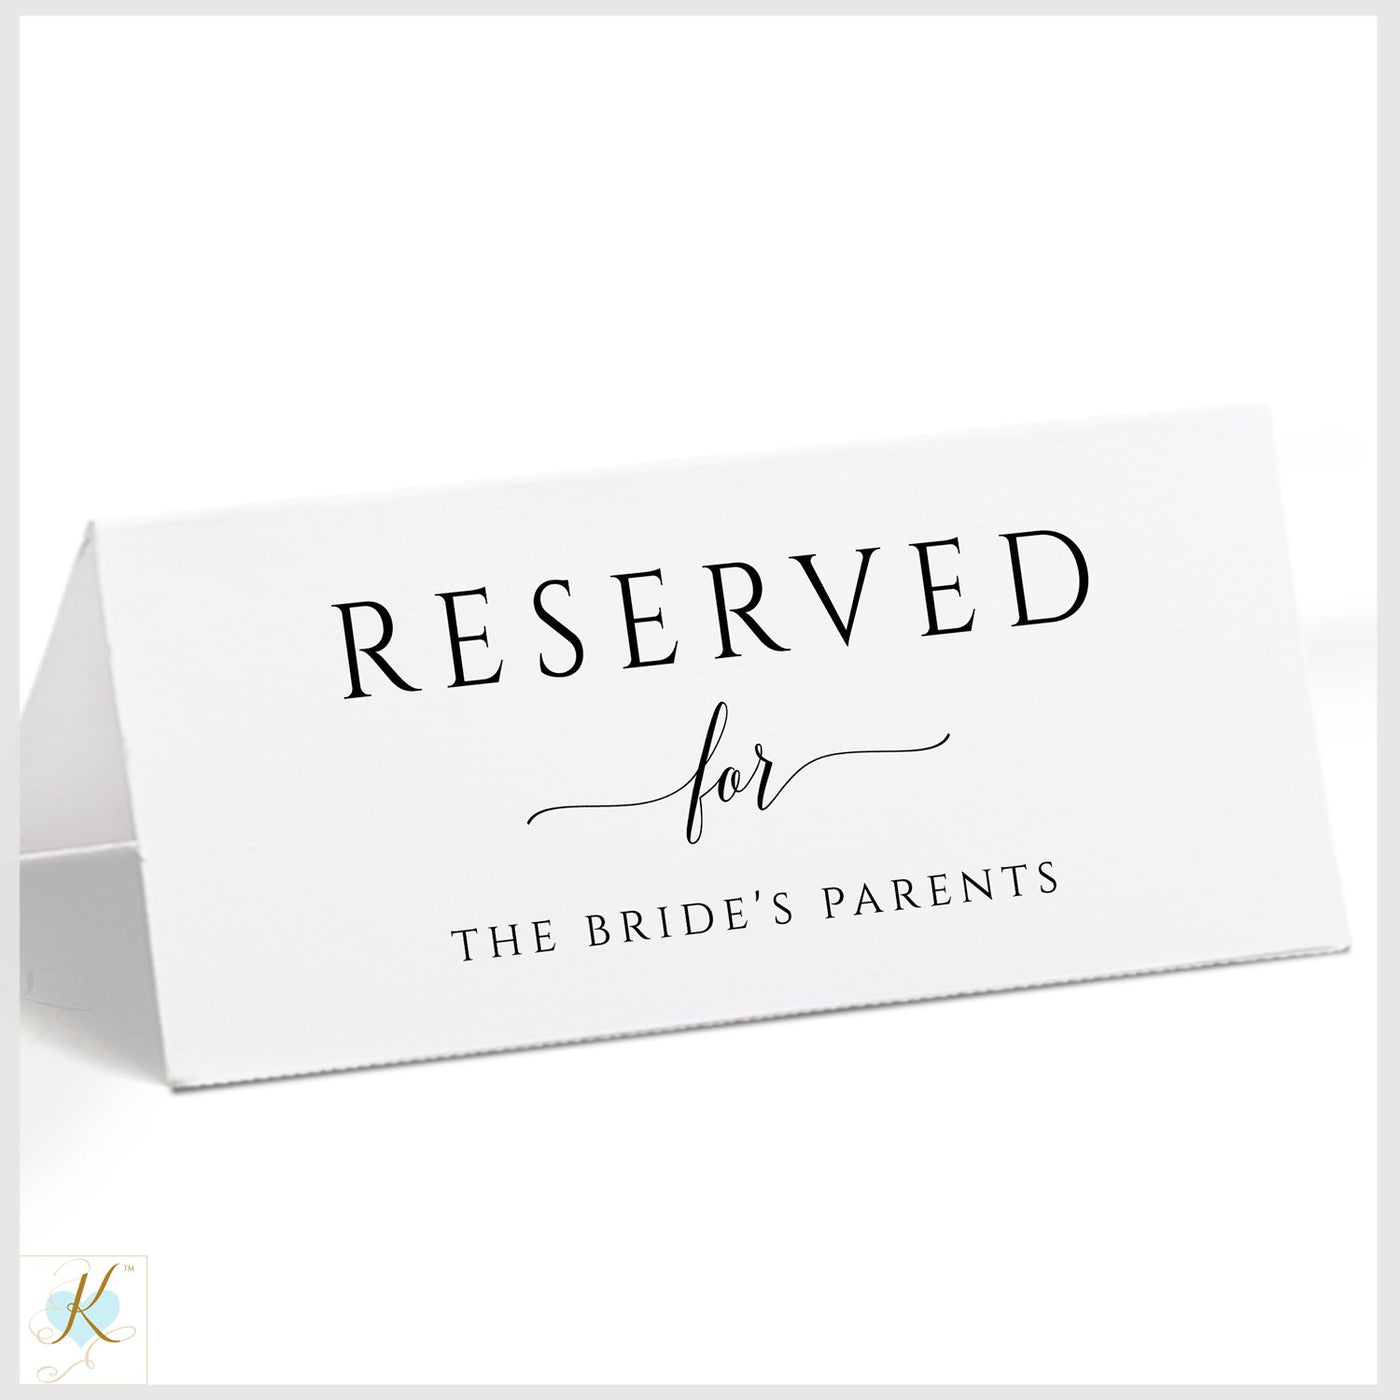 Reserved Sign Template